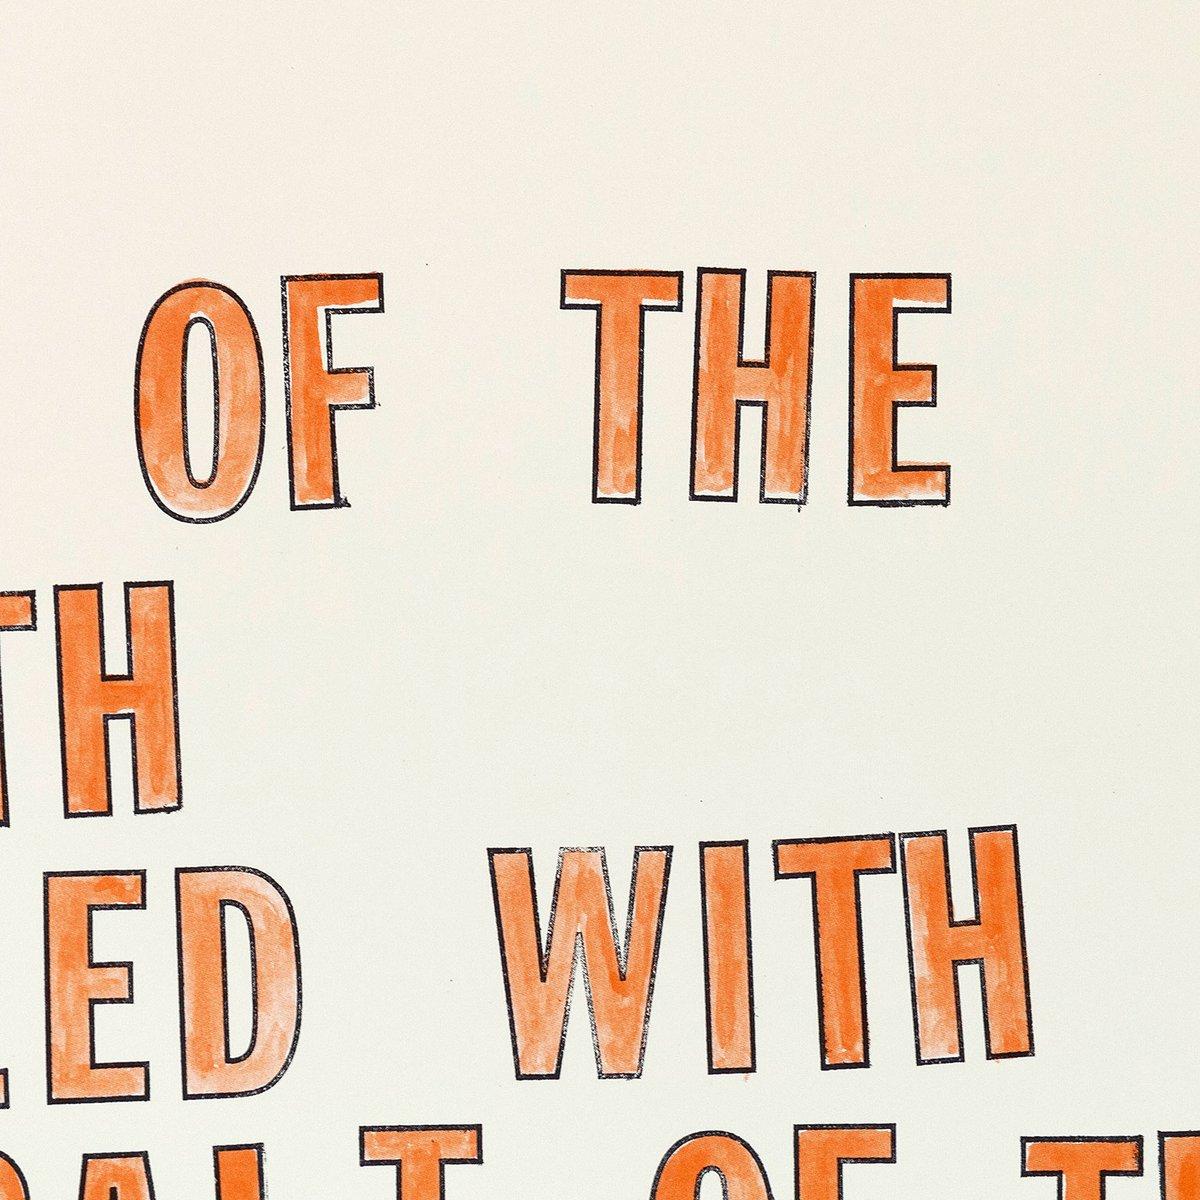 Salt of the Earth - Conceptual Print by Lawrence Weiner